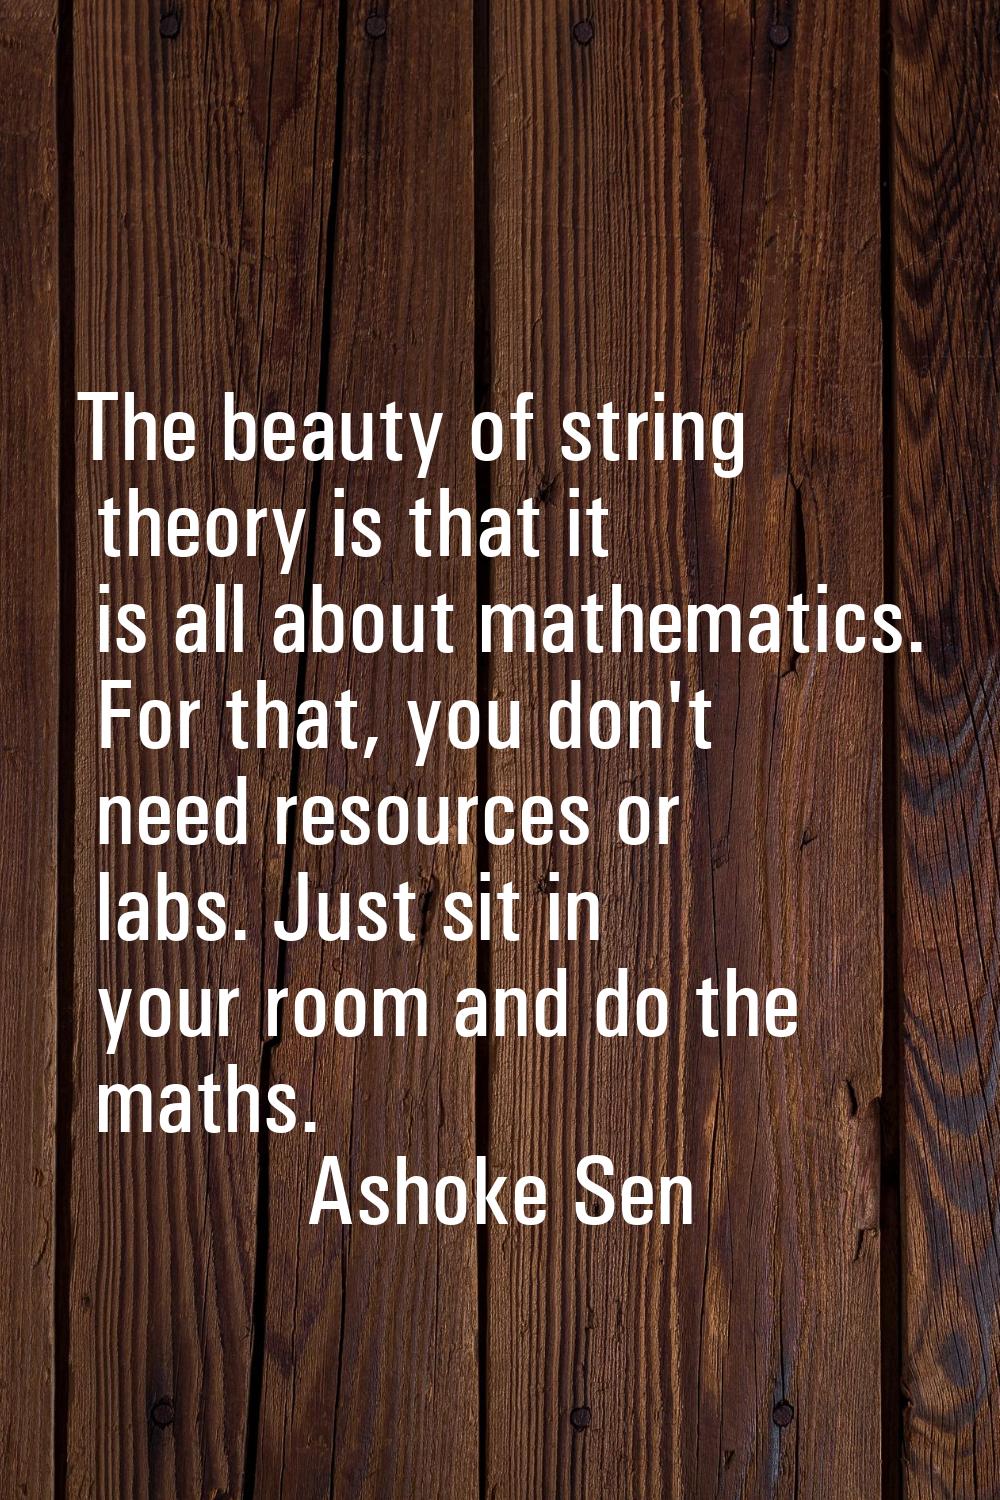 The beauty of string theory is that it is all about mathematics. For that, you don't need resources